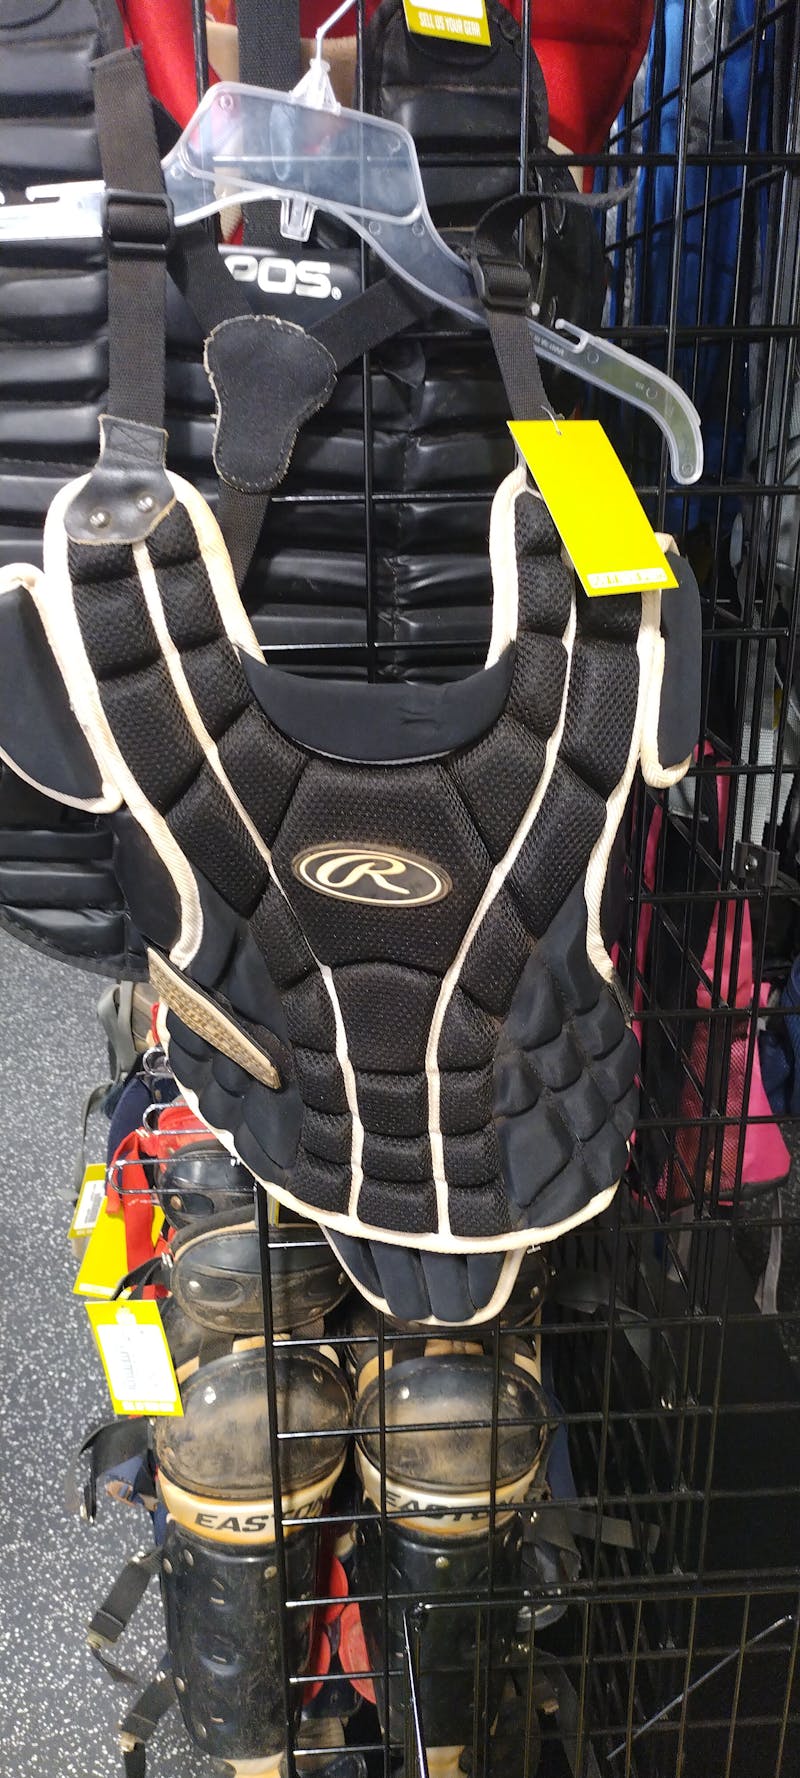 Game-Used Father's Day Catcher's Gear - Includes Chest Protector